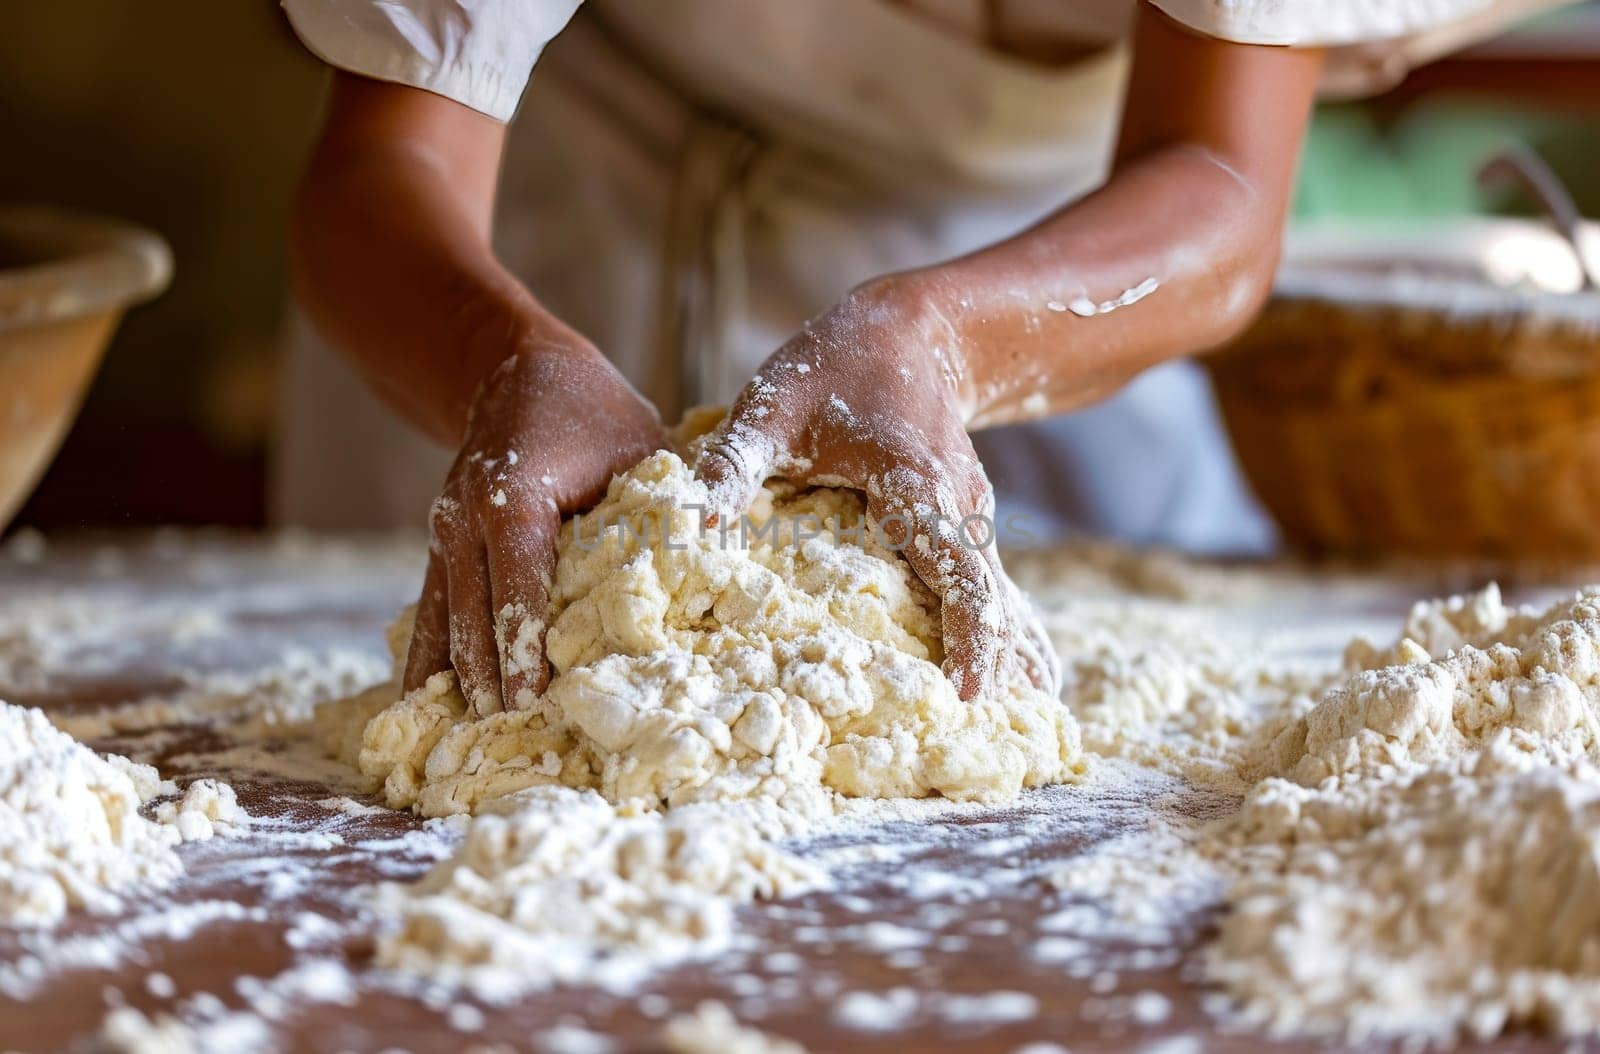 Person Kneading Dough on Table, Preparing Bread Recipe at Home Kitchen by gcm